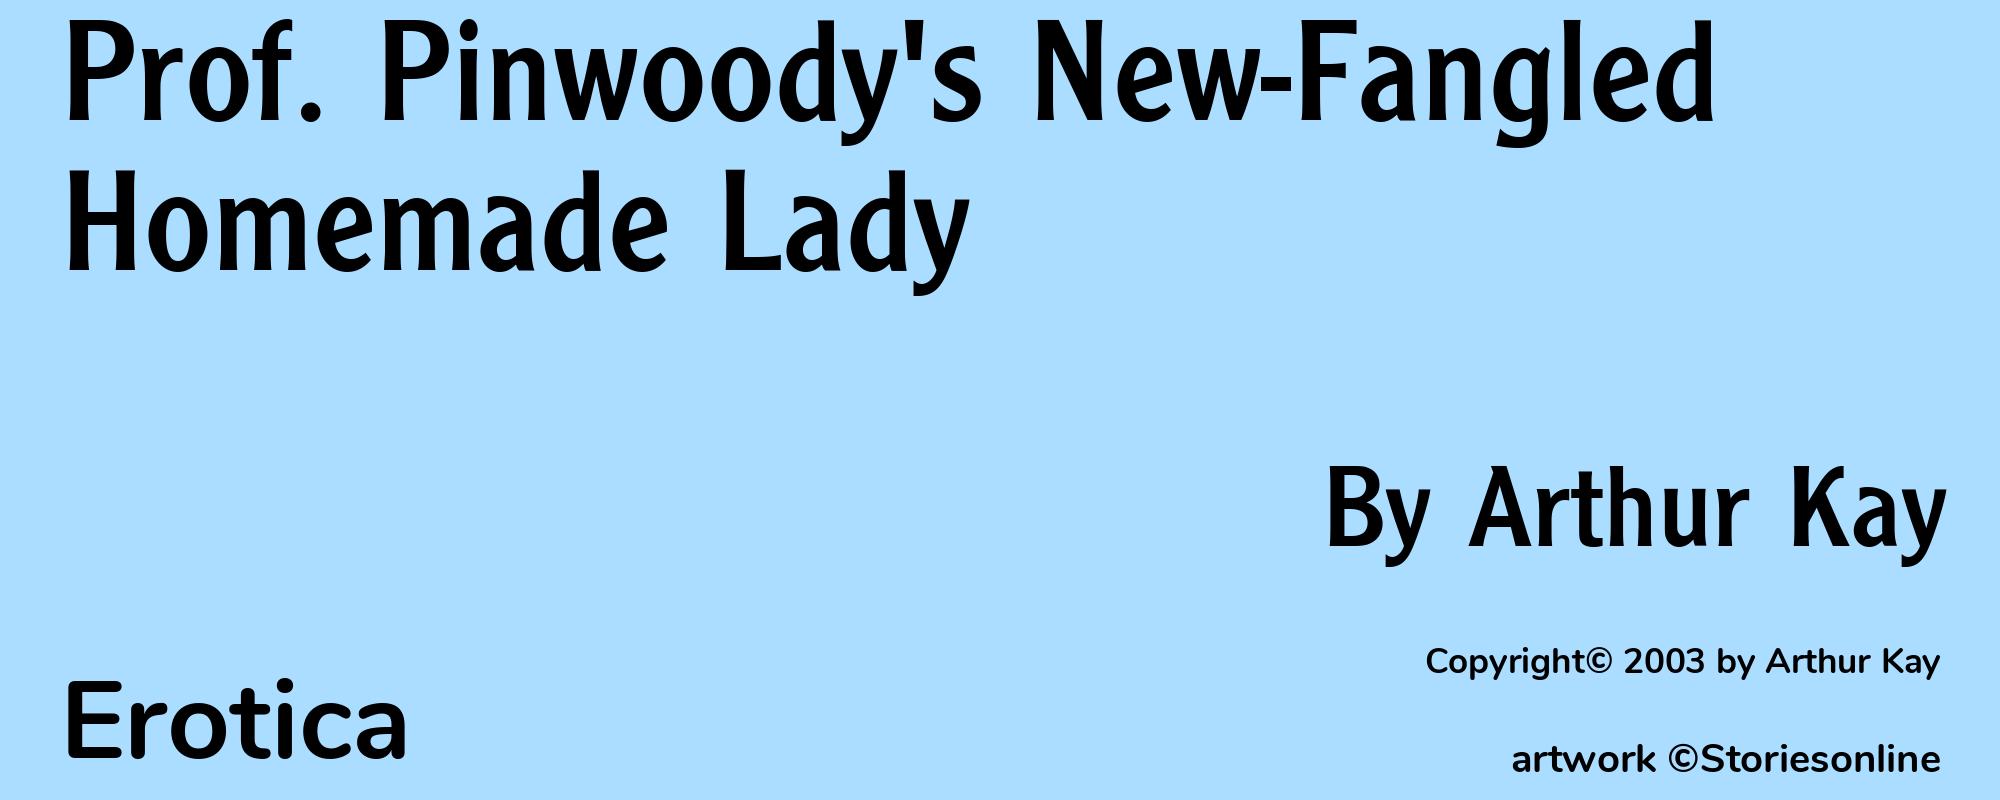 Prof. Pinwoody's New-Fangled Homemade Lady - Cover